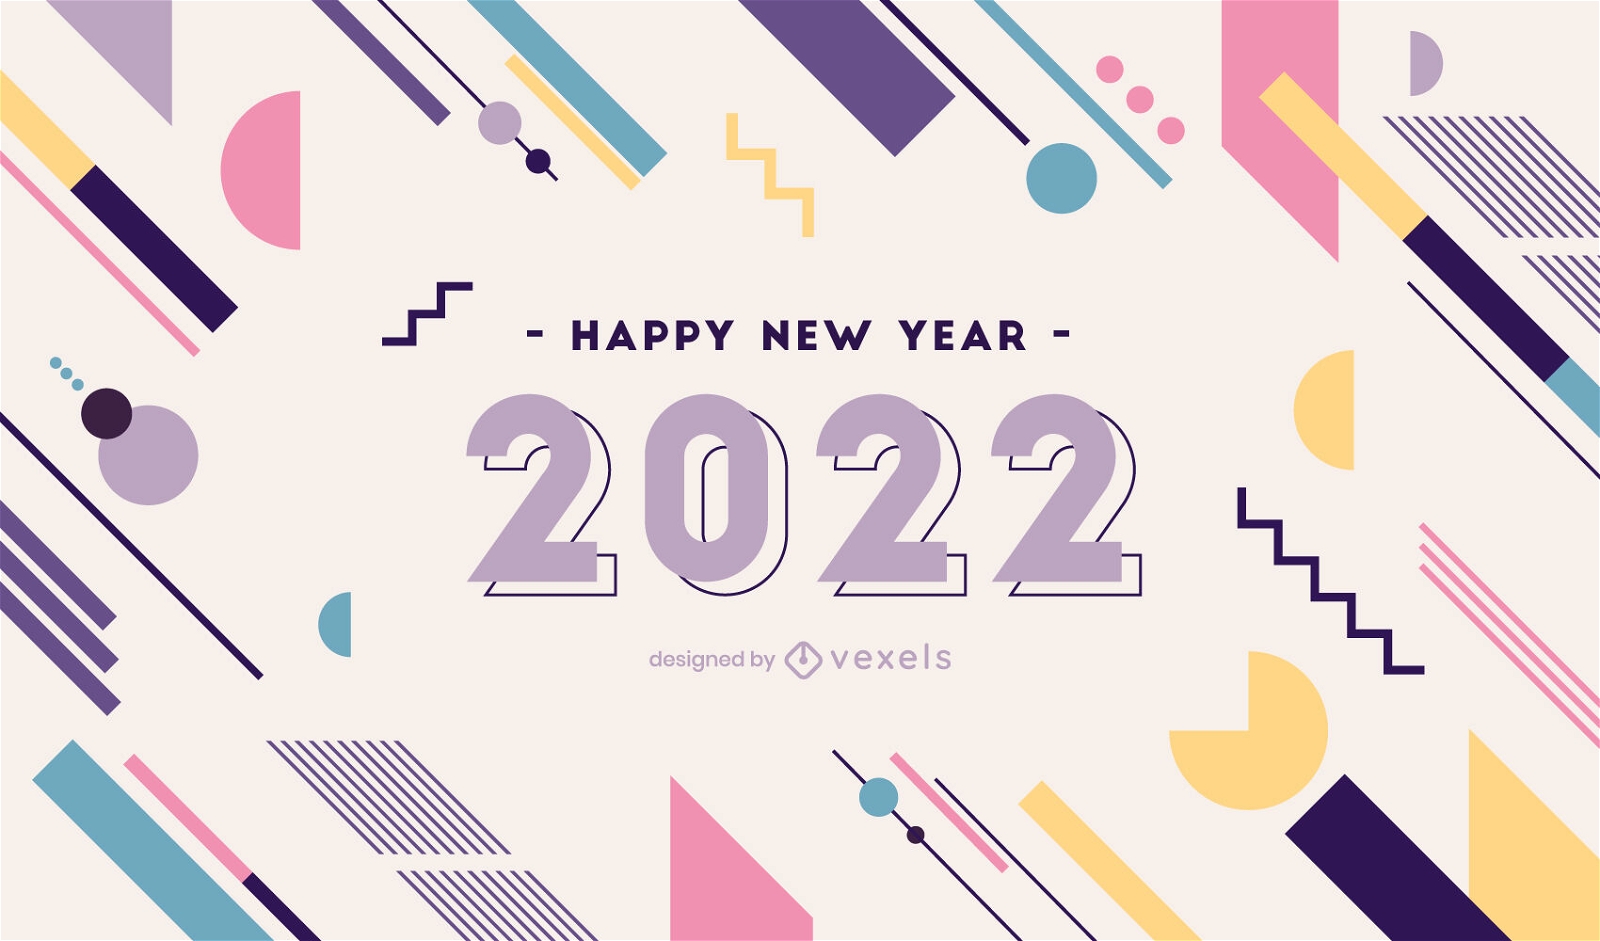 Awesome new year illustration design